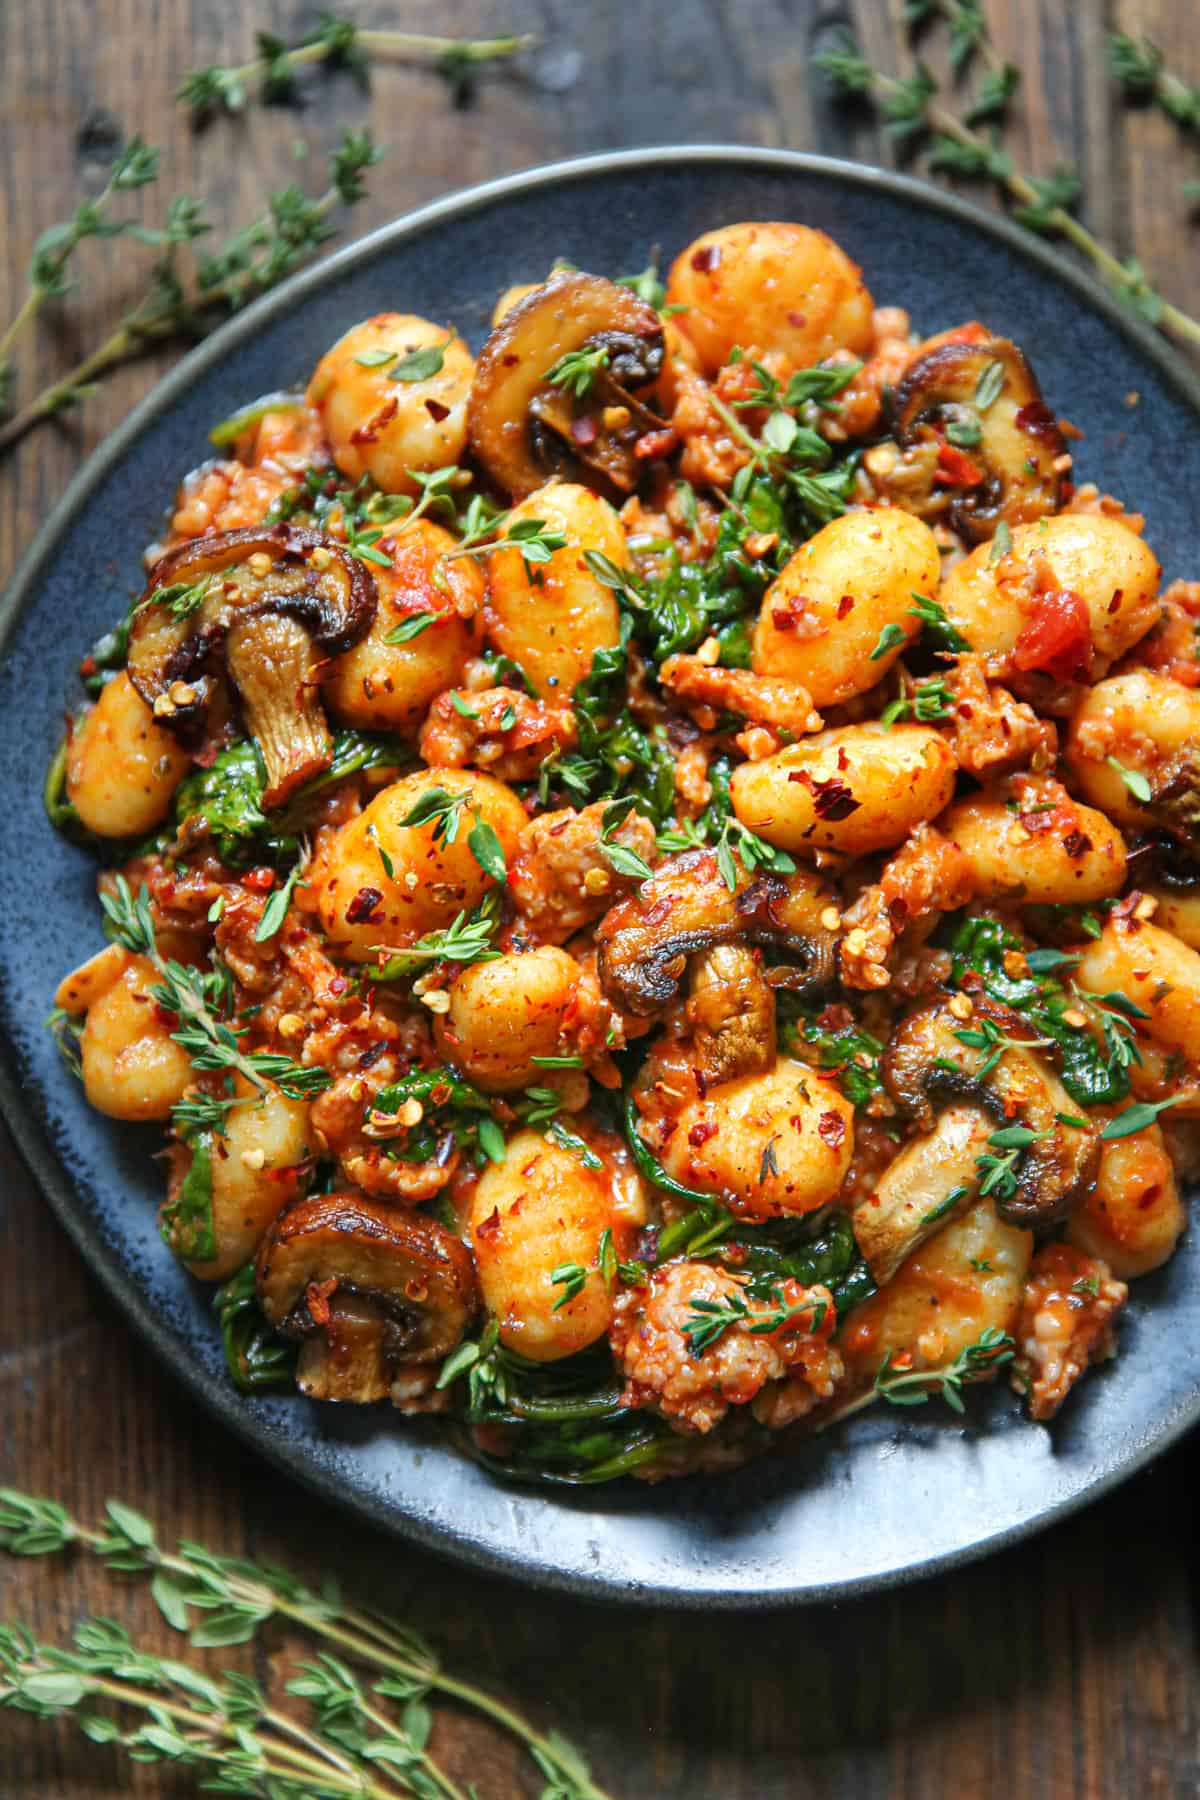 gnocchi with tomato sauce, sausage, spinach, and mushrooms on a blue plate.